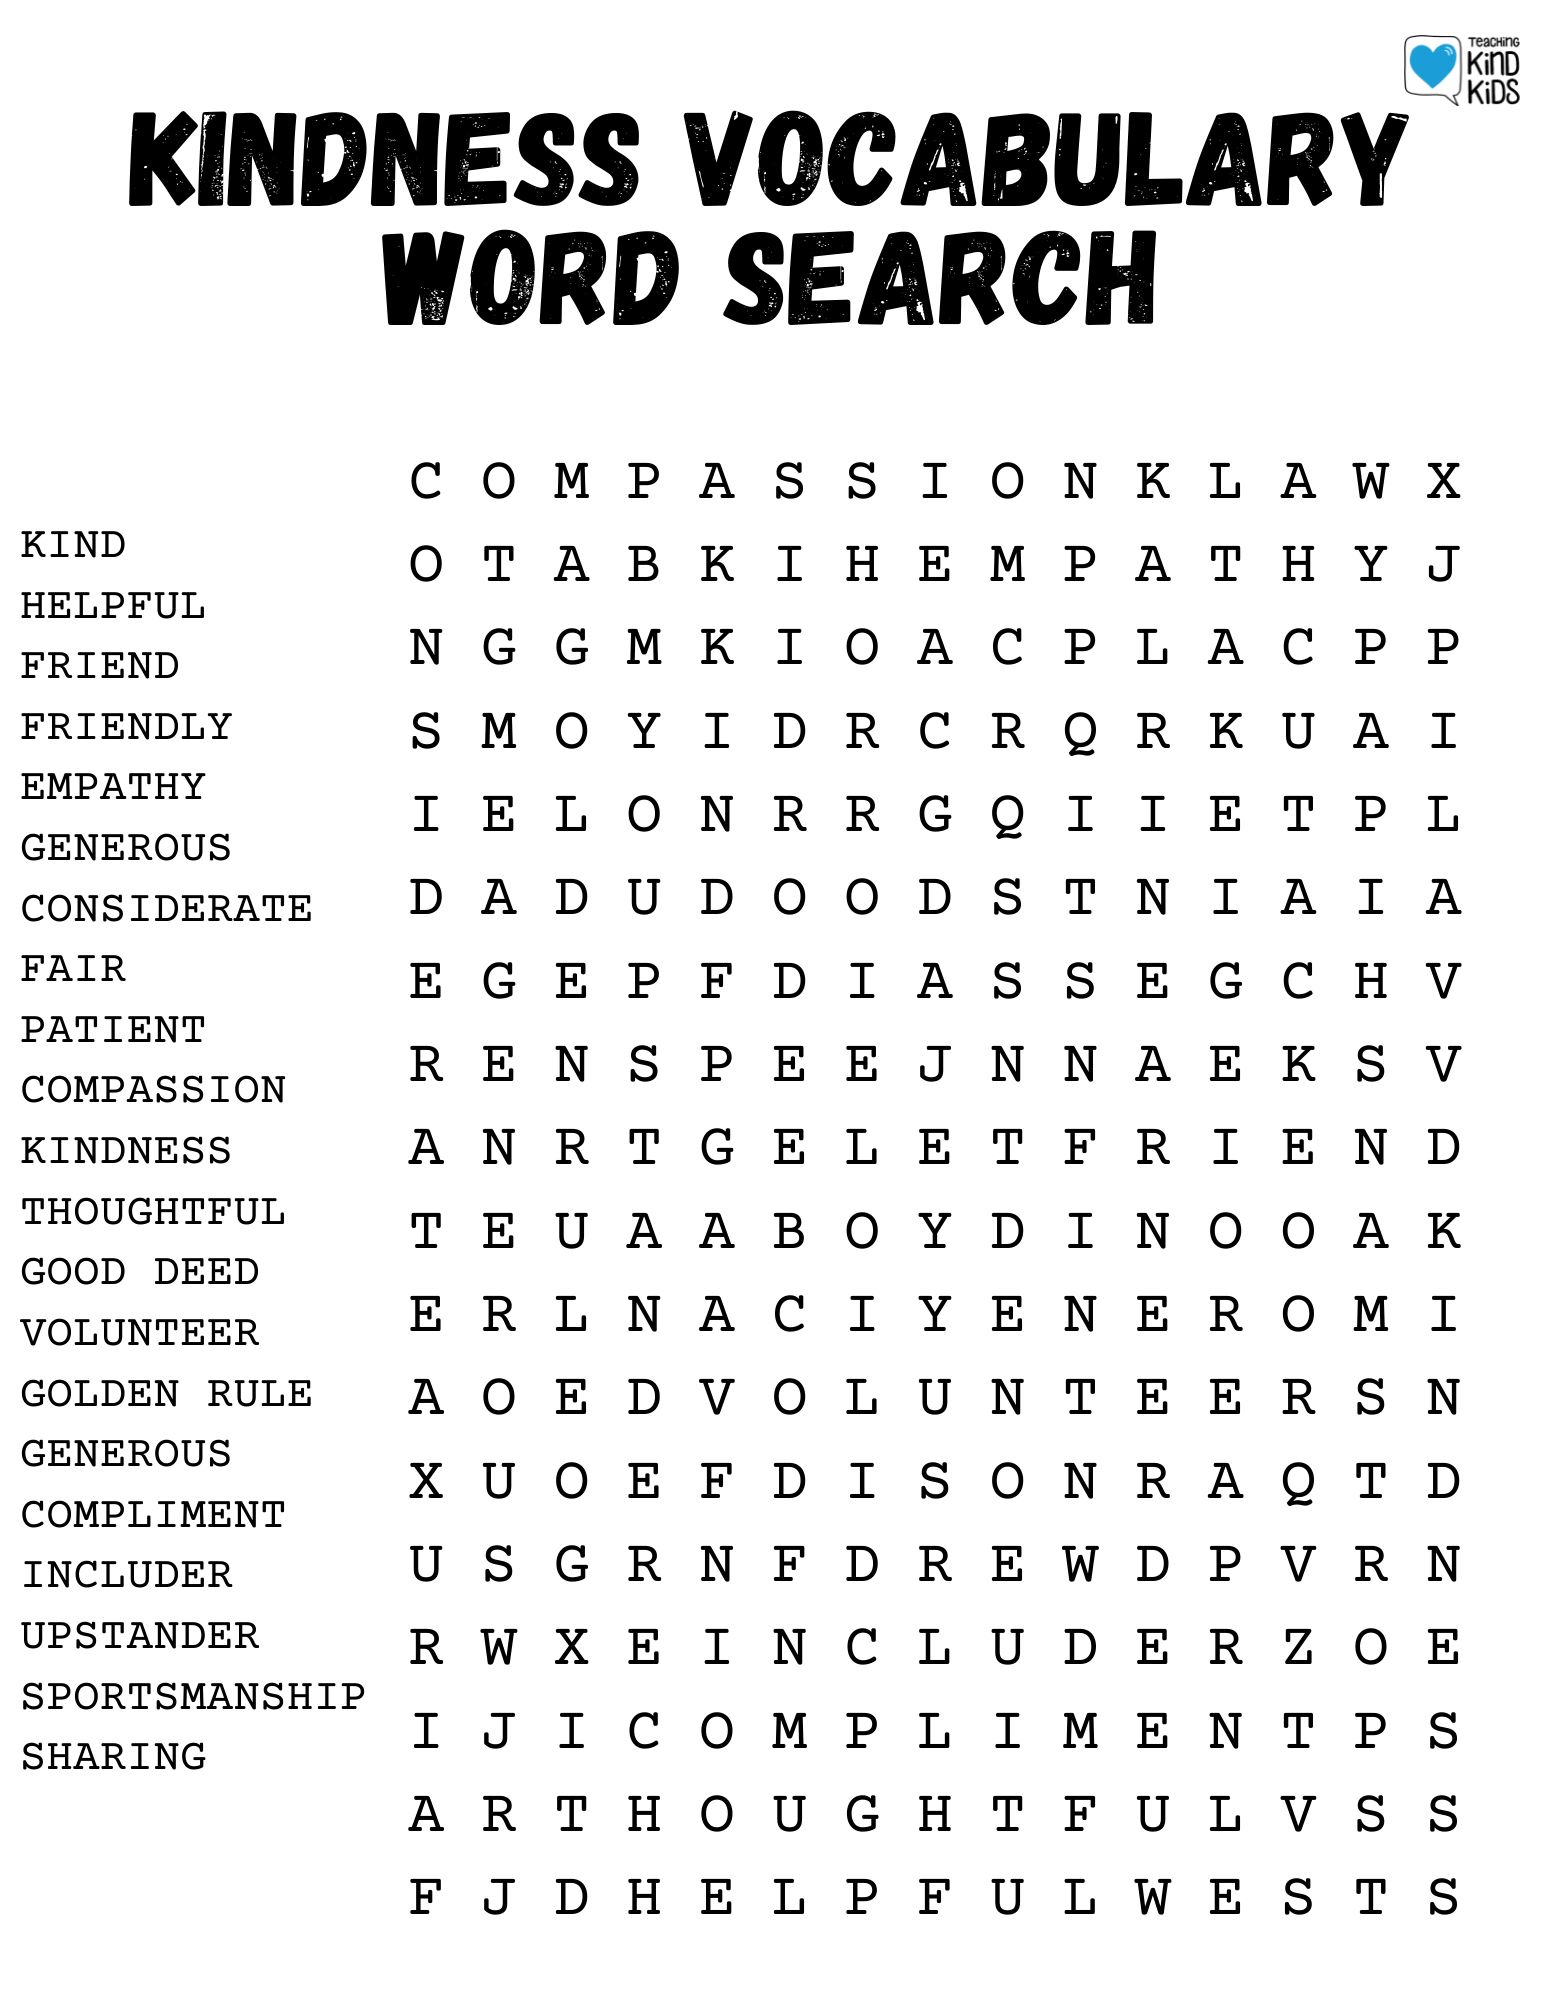 word search kindness 11